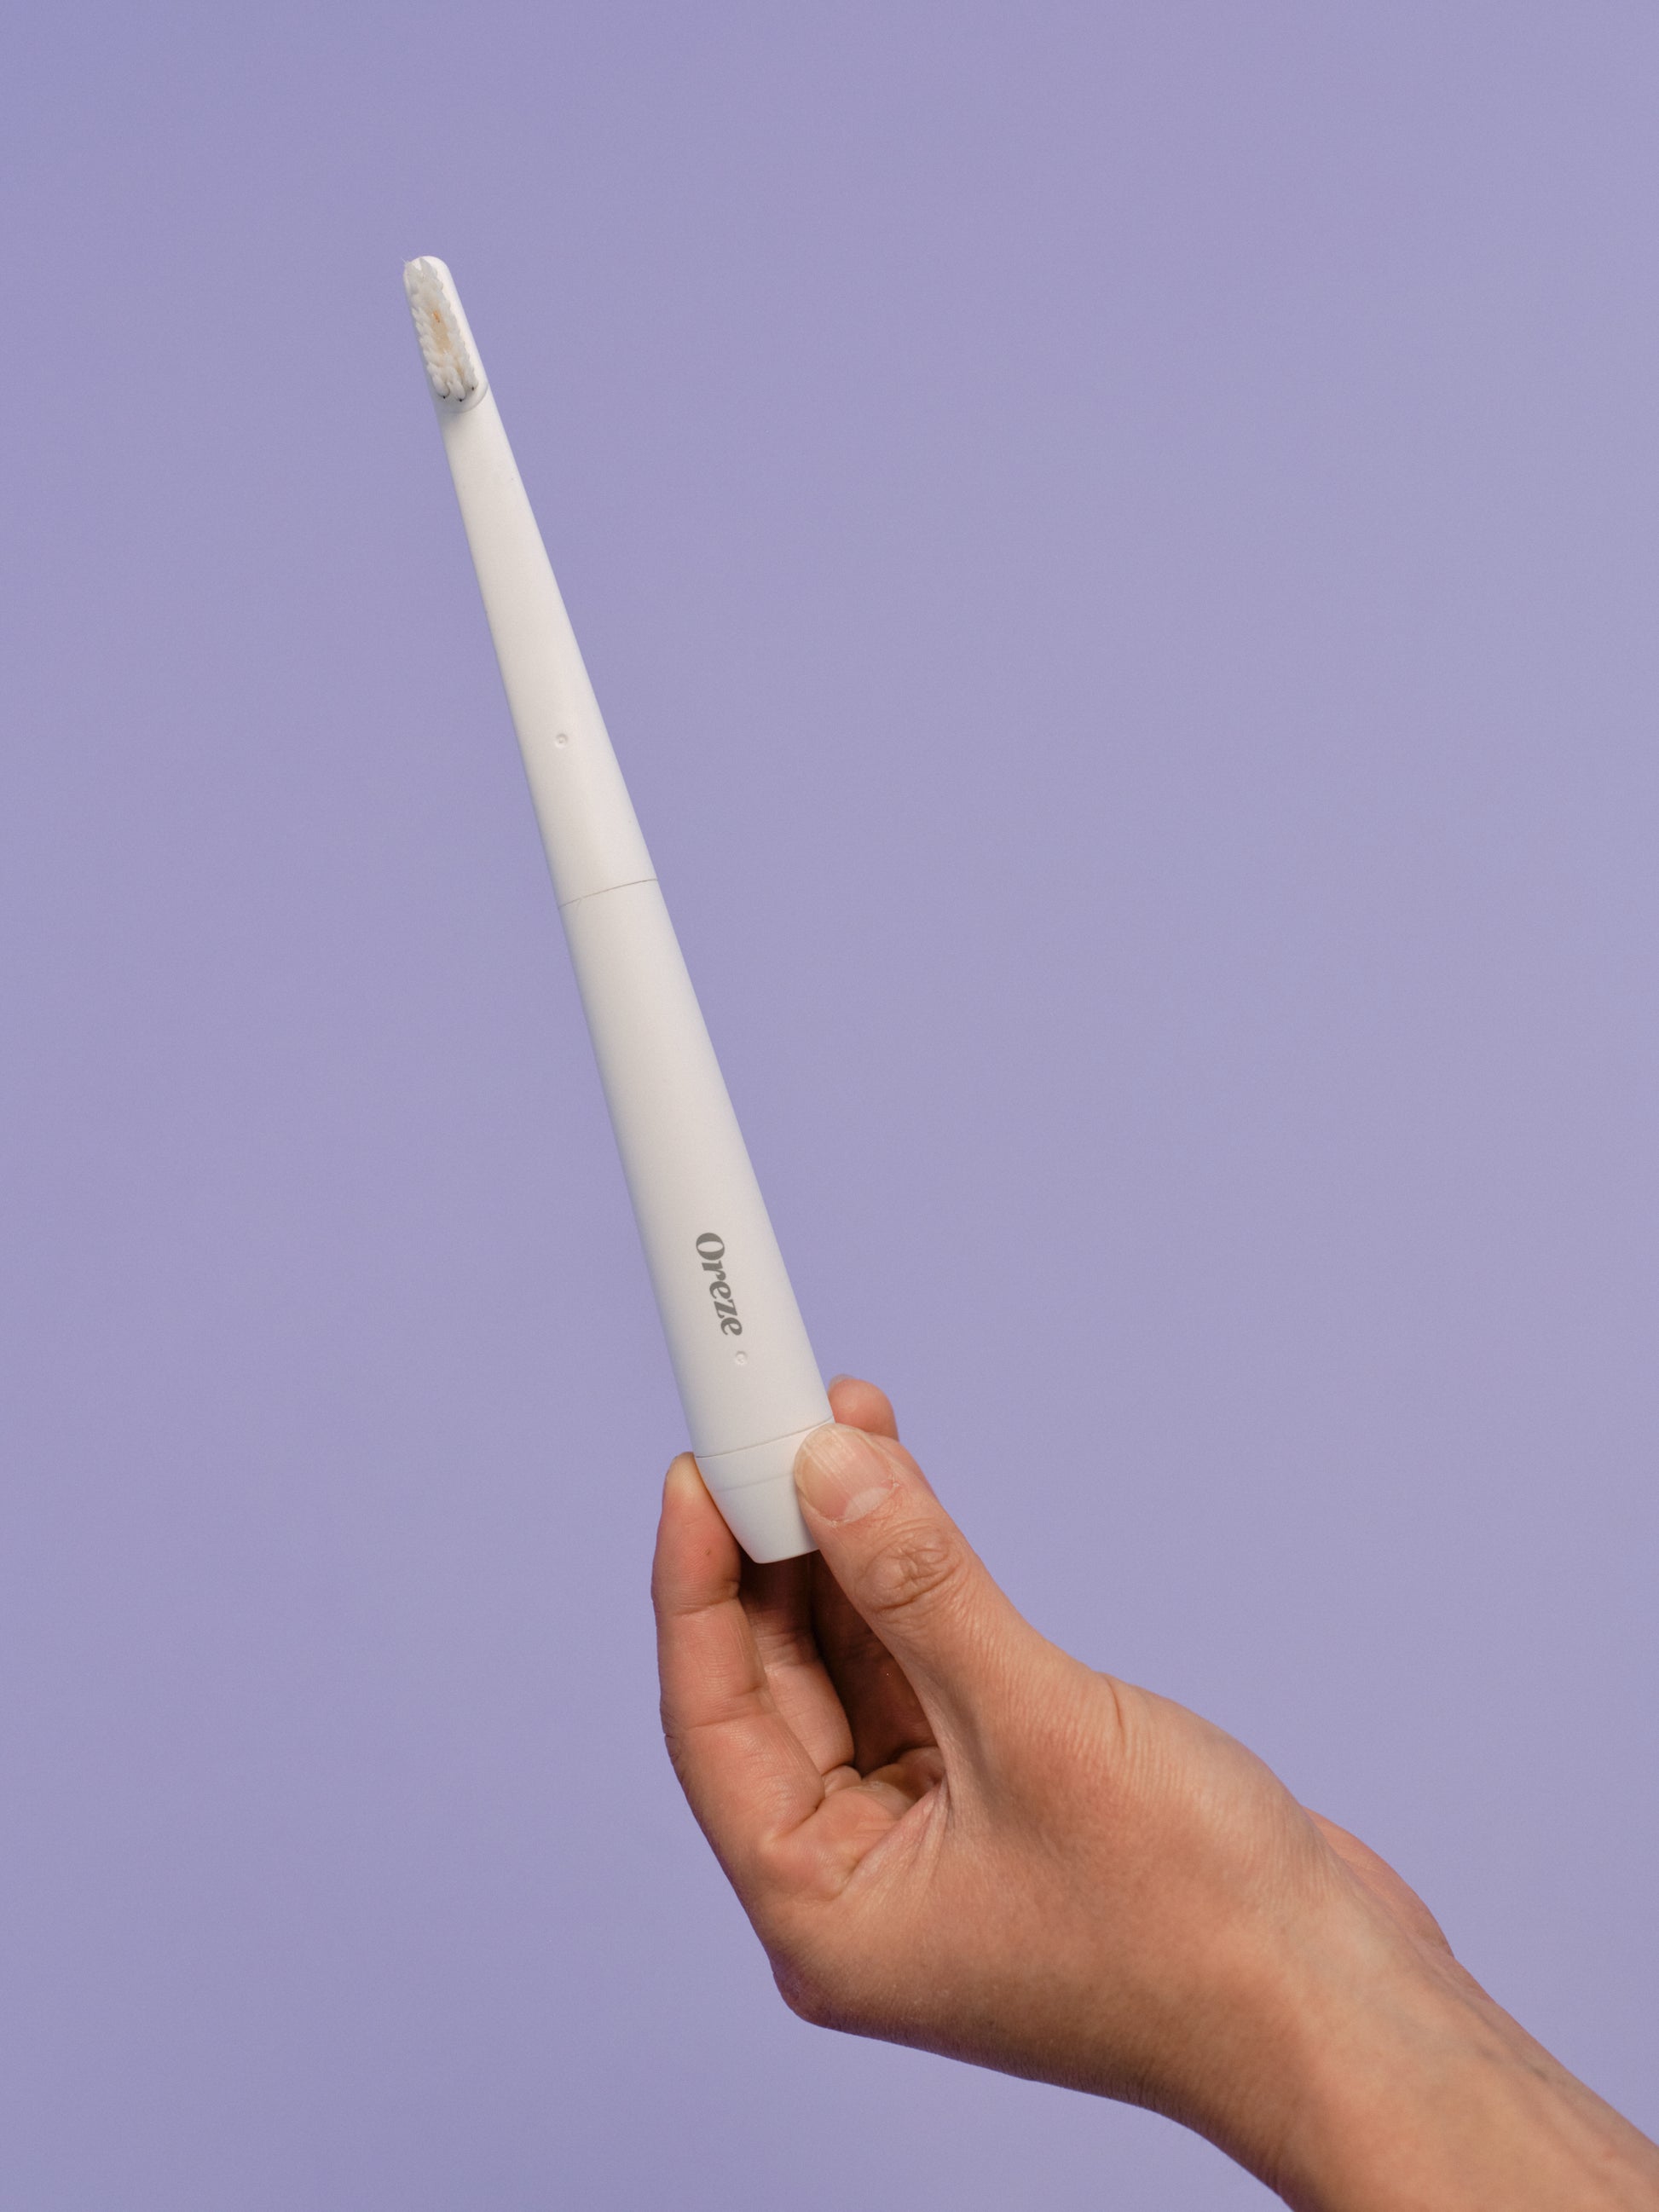 Frontal view of the Oreze pet toothbrush